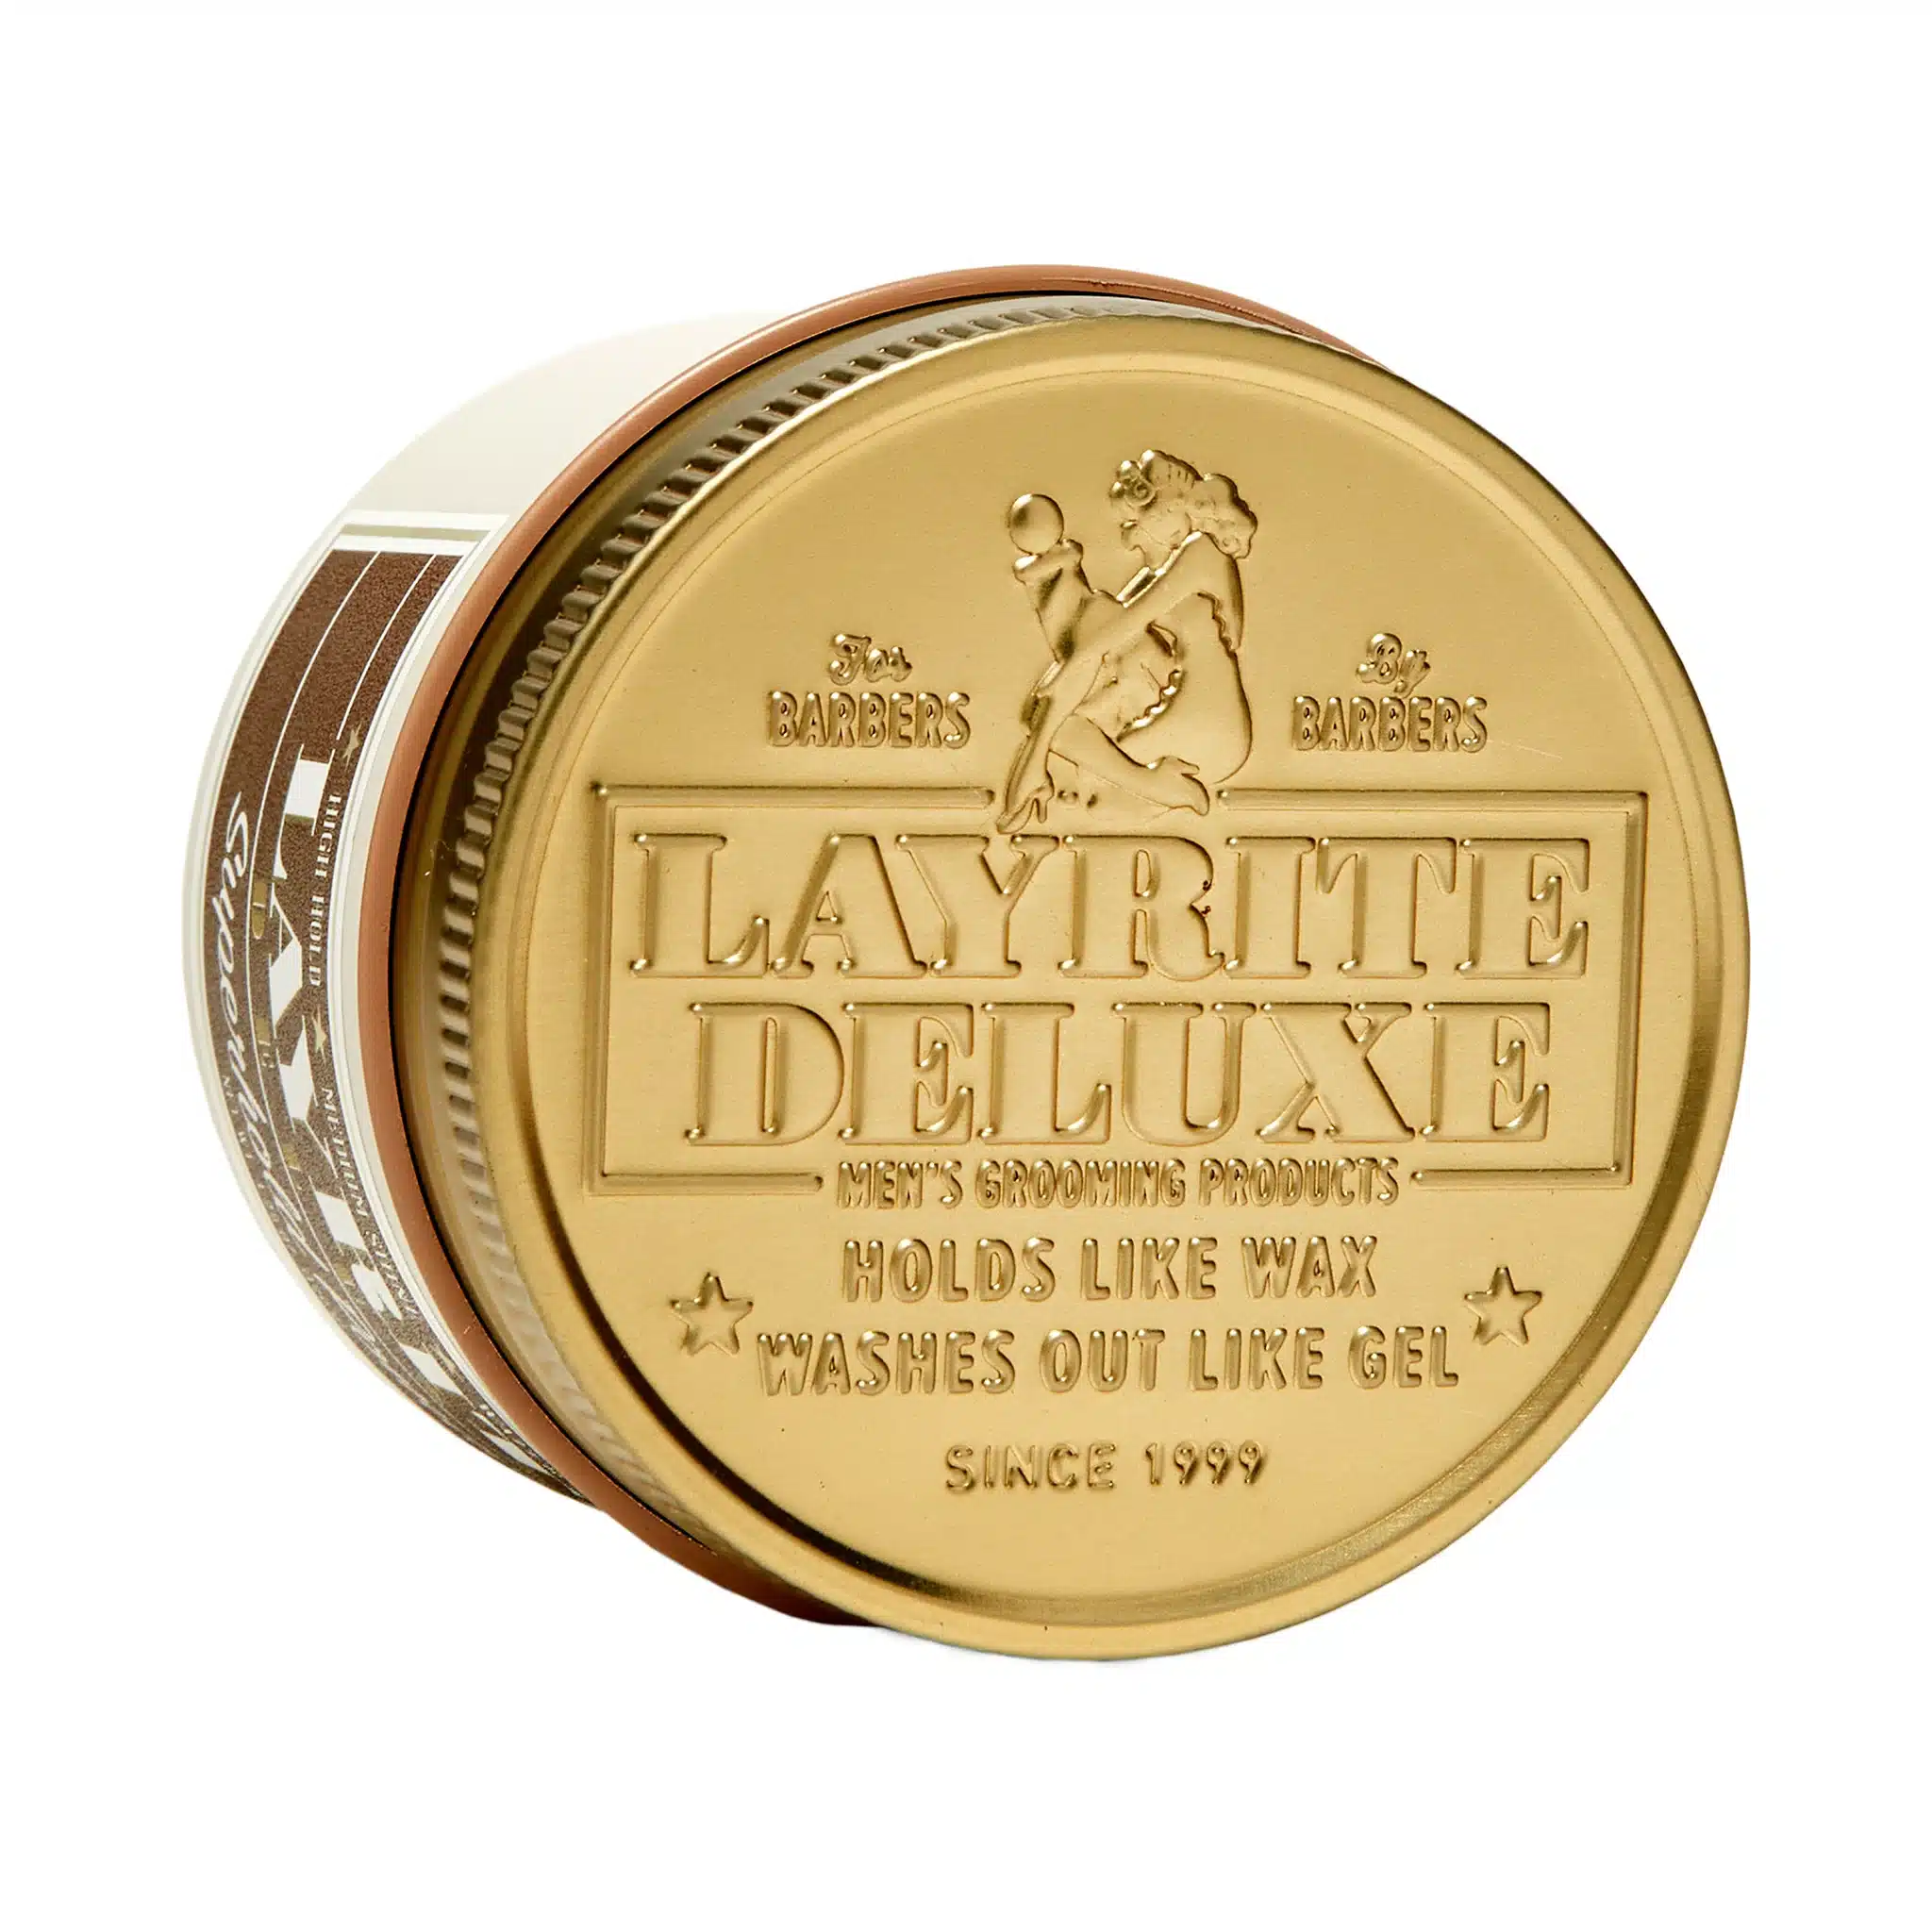 Layrite Superhold Pomade 4.25oz - Top